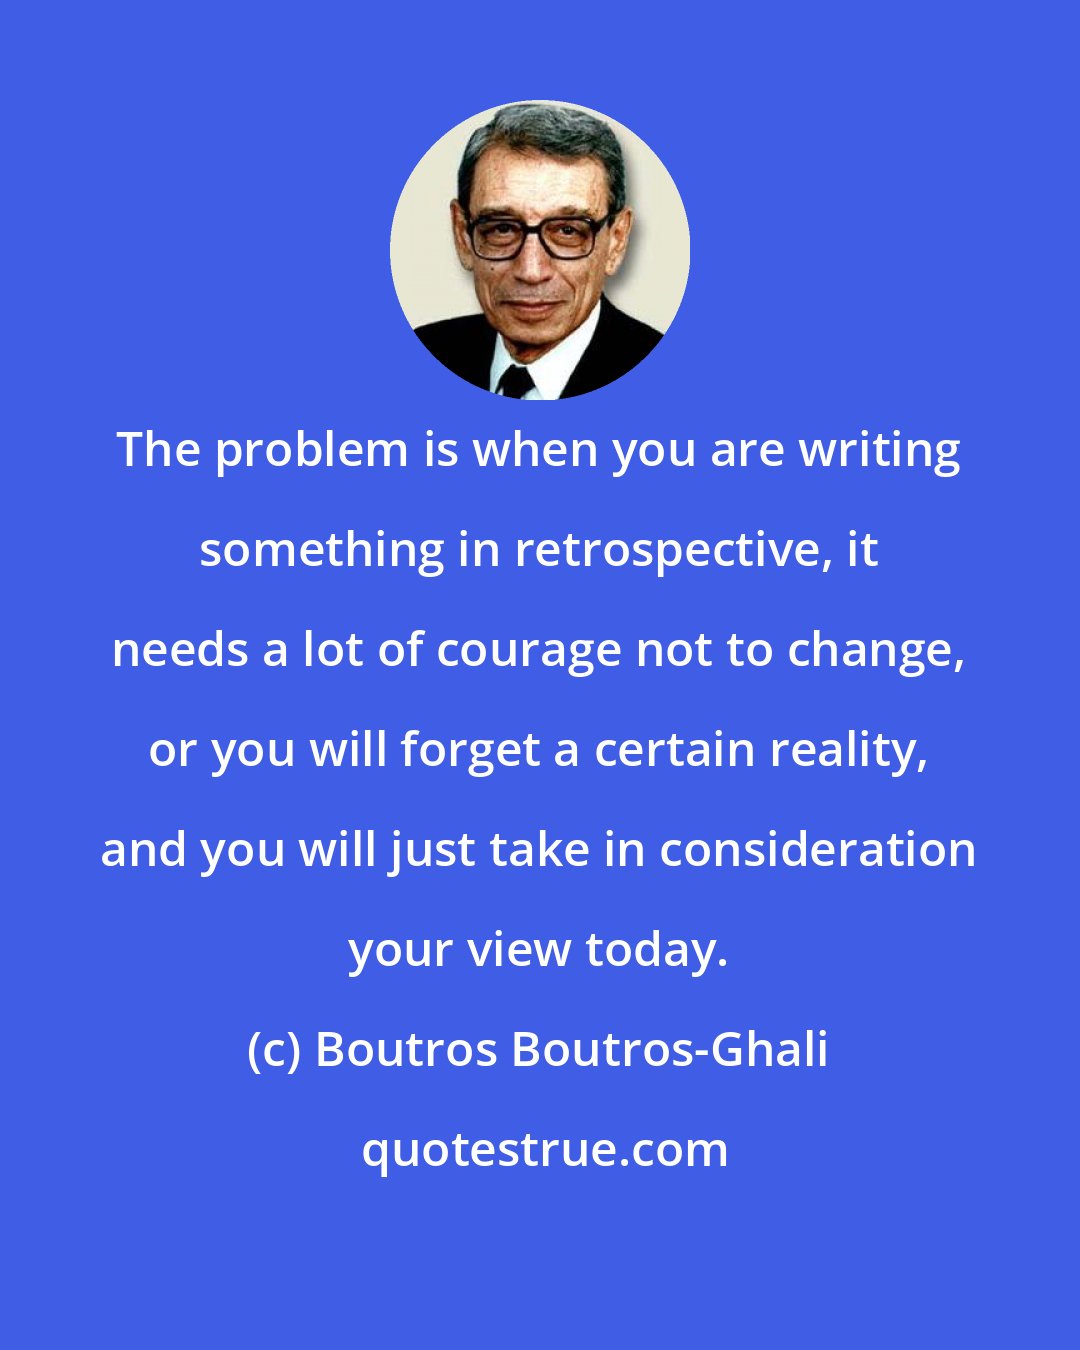 Boutros Boutros-Ghali: The problem is when you are writing something in retrospective, it needs a lot of courage not to change, or you will forget a certain reality, and you will just take in consideration your view today.